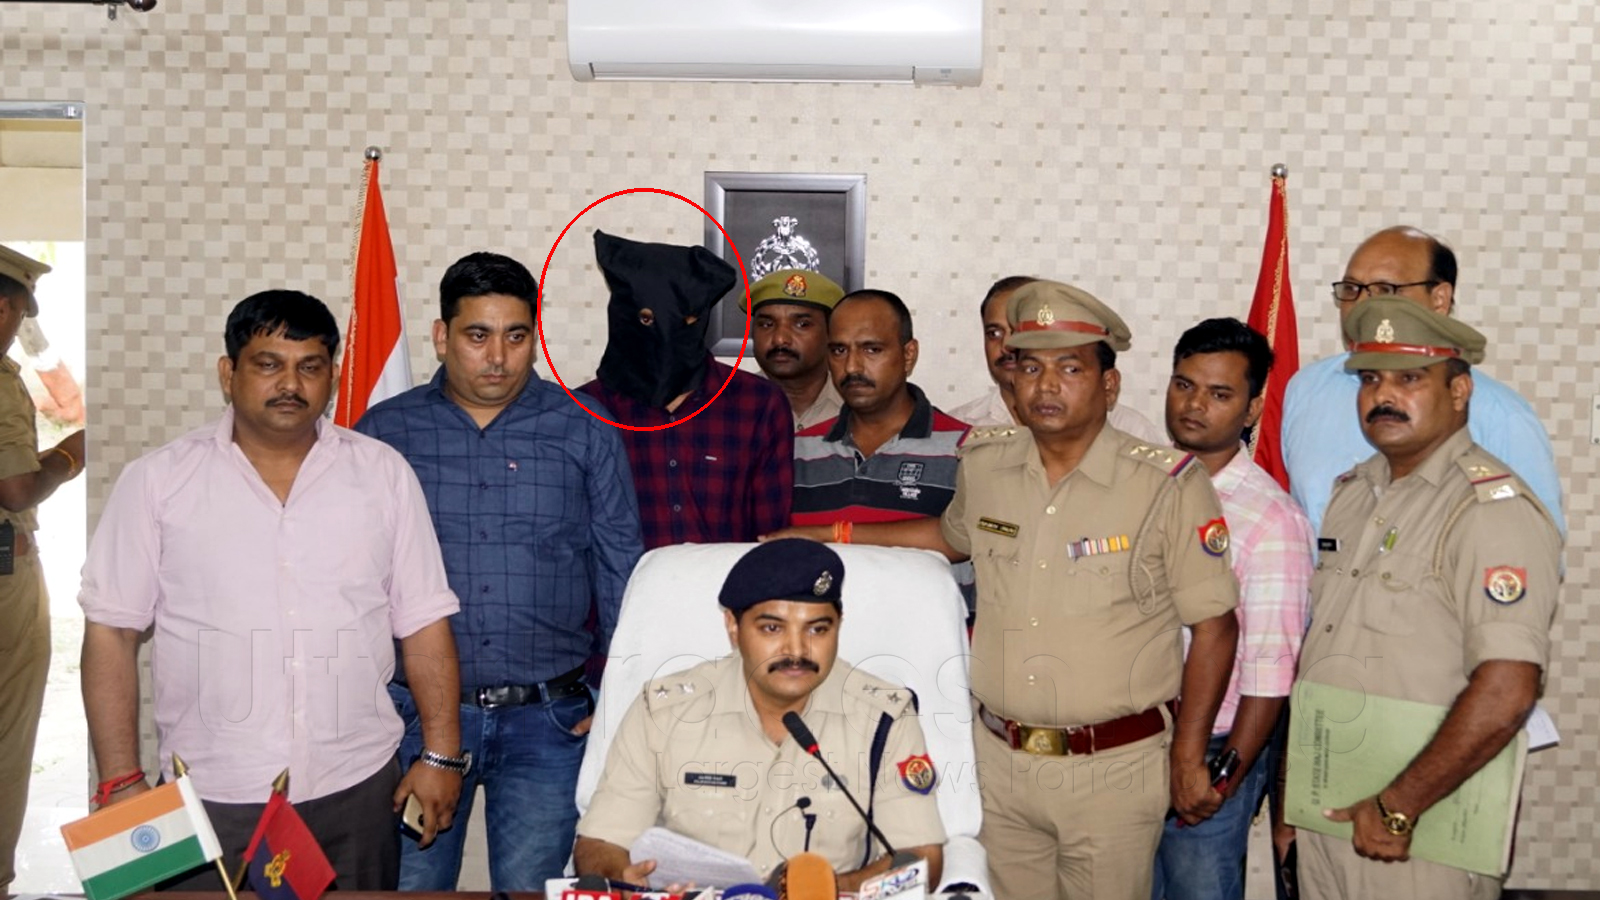 Sameer Sheikh alias Rakka Arrested Prize of Rs 1.5 Lakh in Lucknow